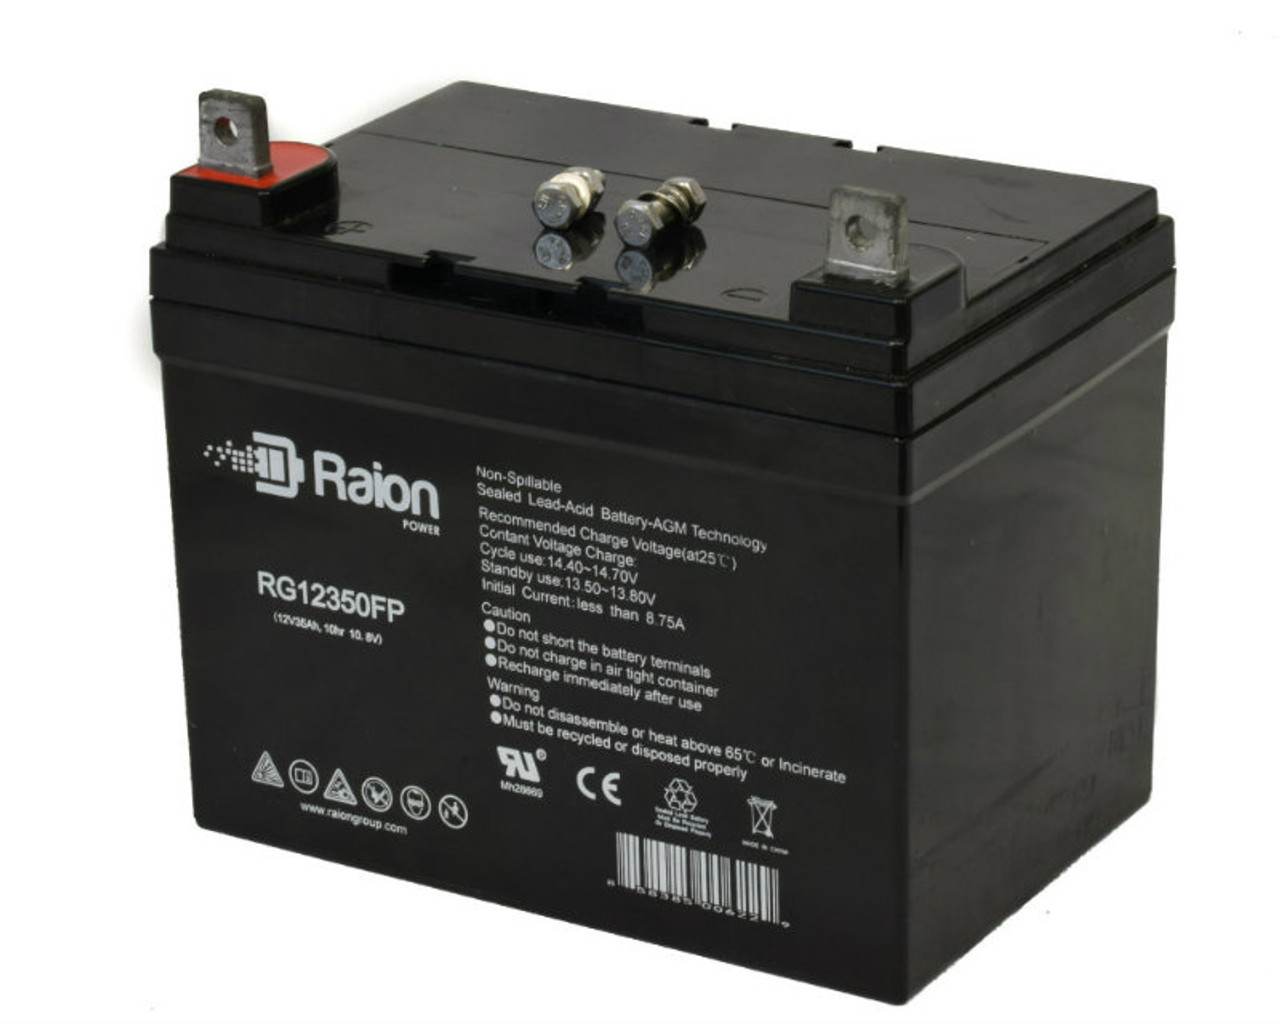 Raion Power Replacement 12V 35Ah RG12350FP Battery for Simplicity ZT16H